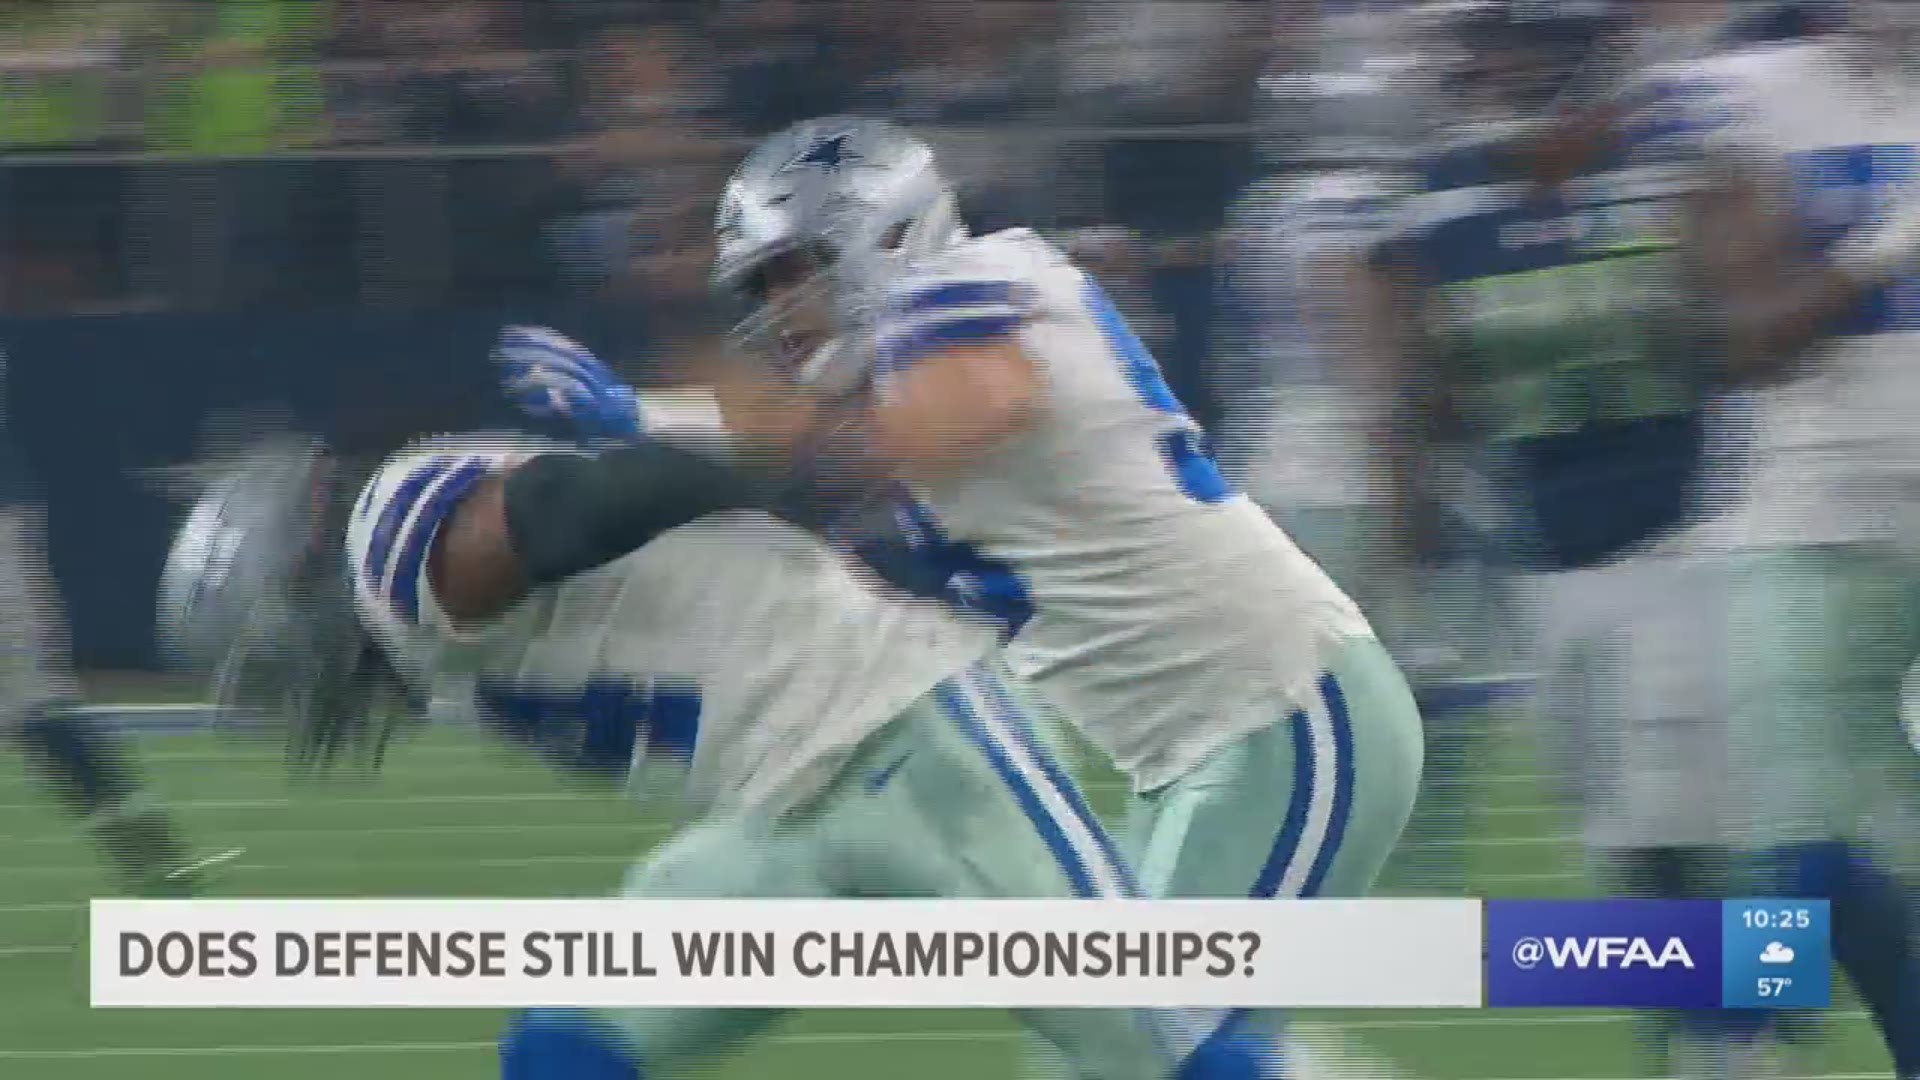 The Dallas Cowboys have the best defense left in the NFL playoffs. But is that as good a thing as it used to be?